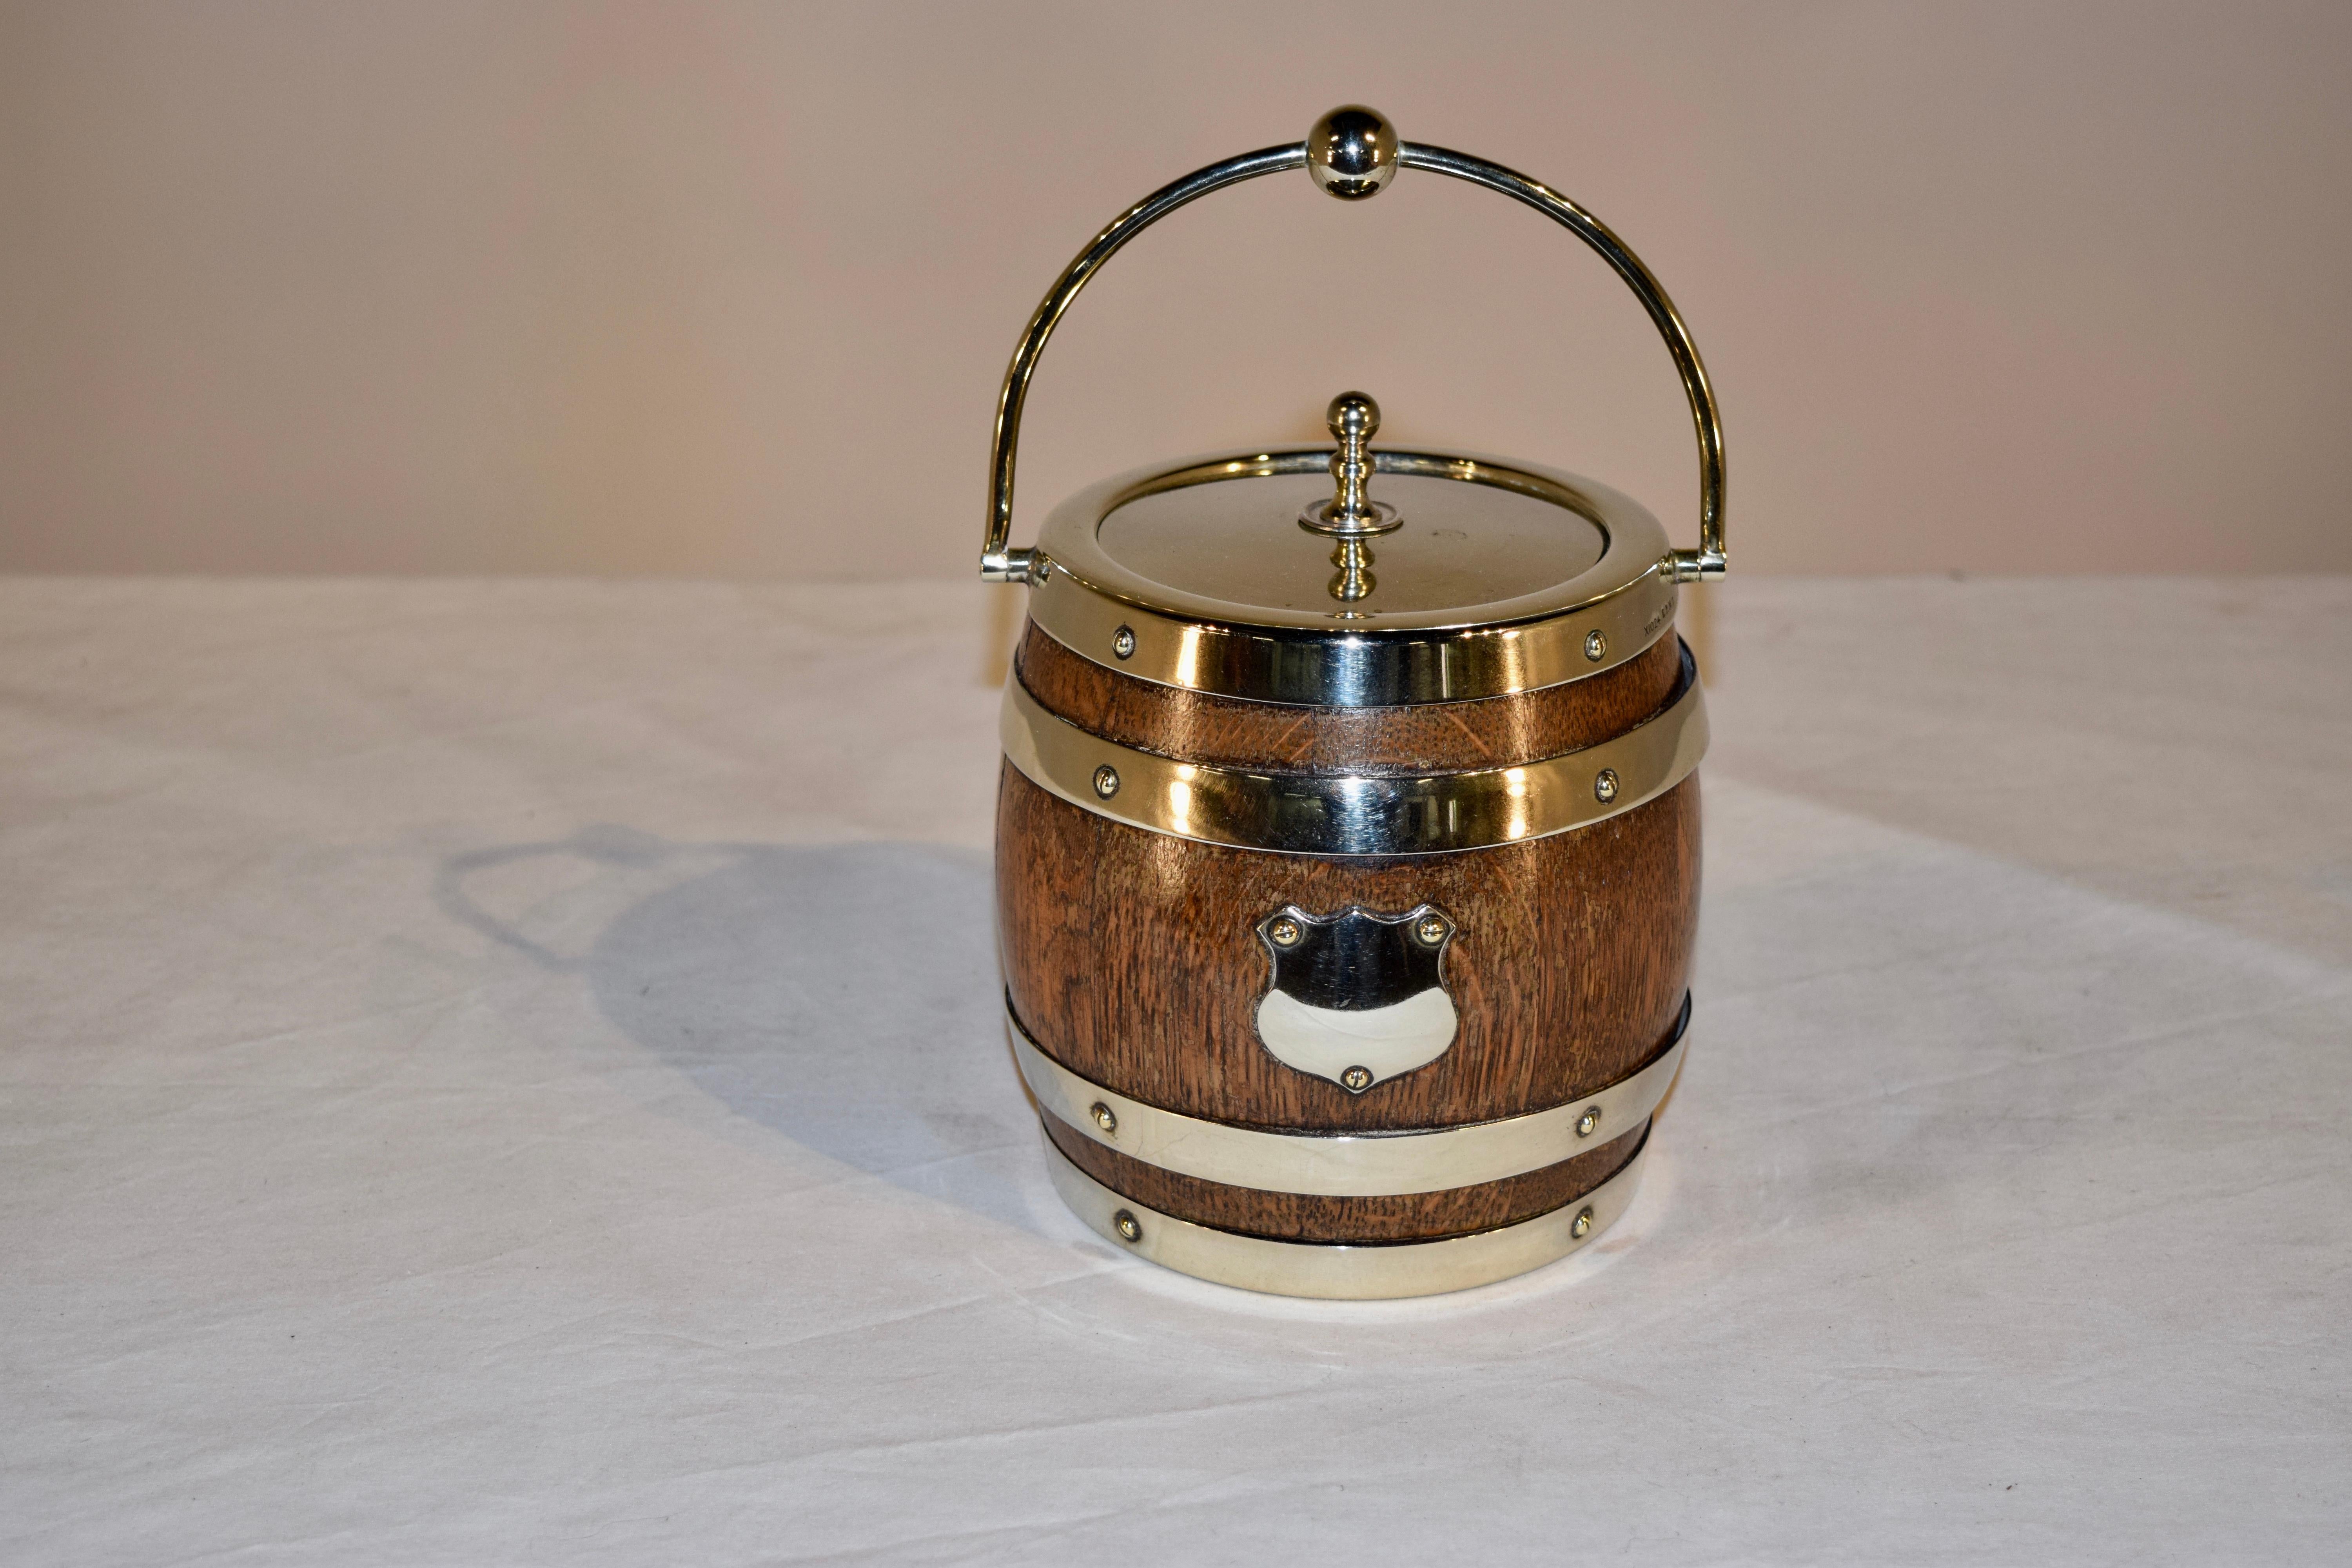 Nice biscuit barrel made of oak from England with the original porcelain liner and silver plated straps, lid and plaque. Silver finish is rubbed thin from years of polishing.